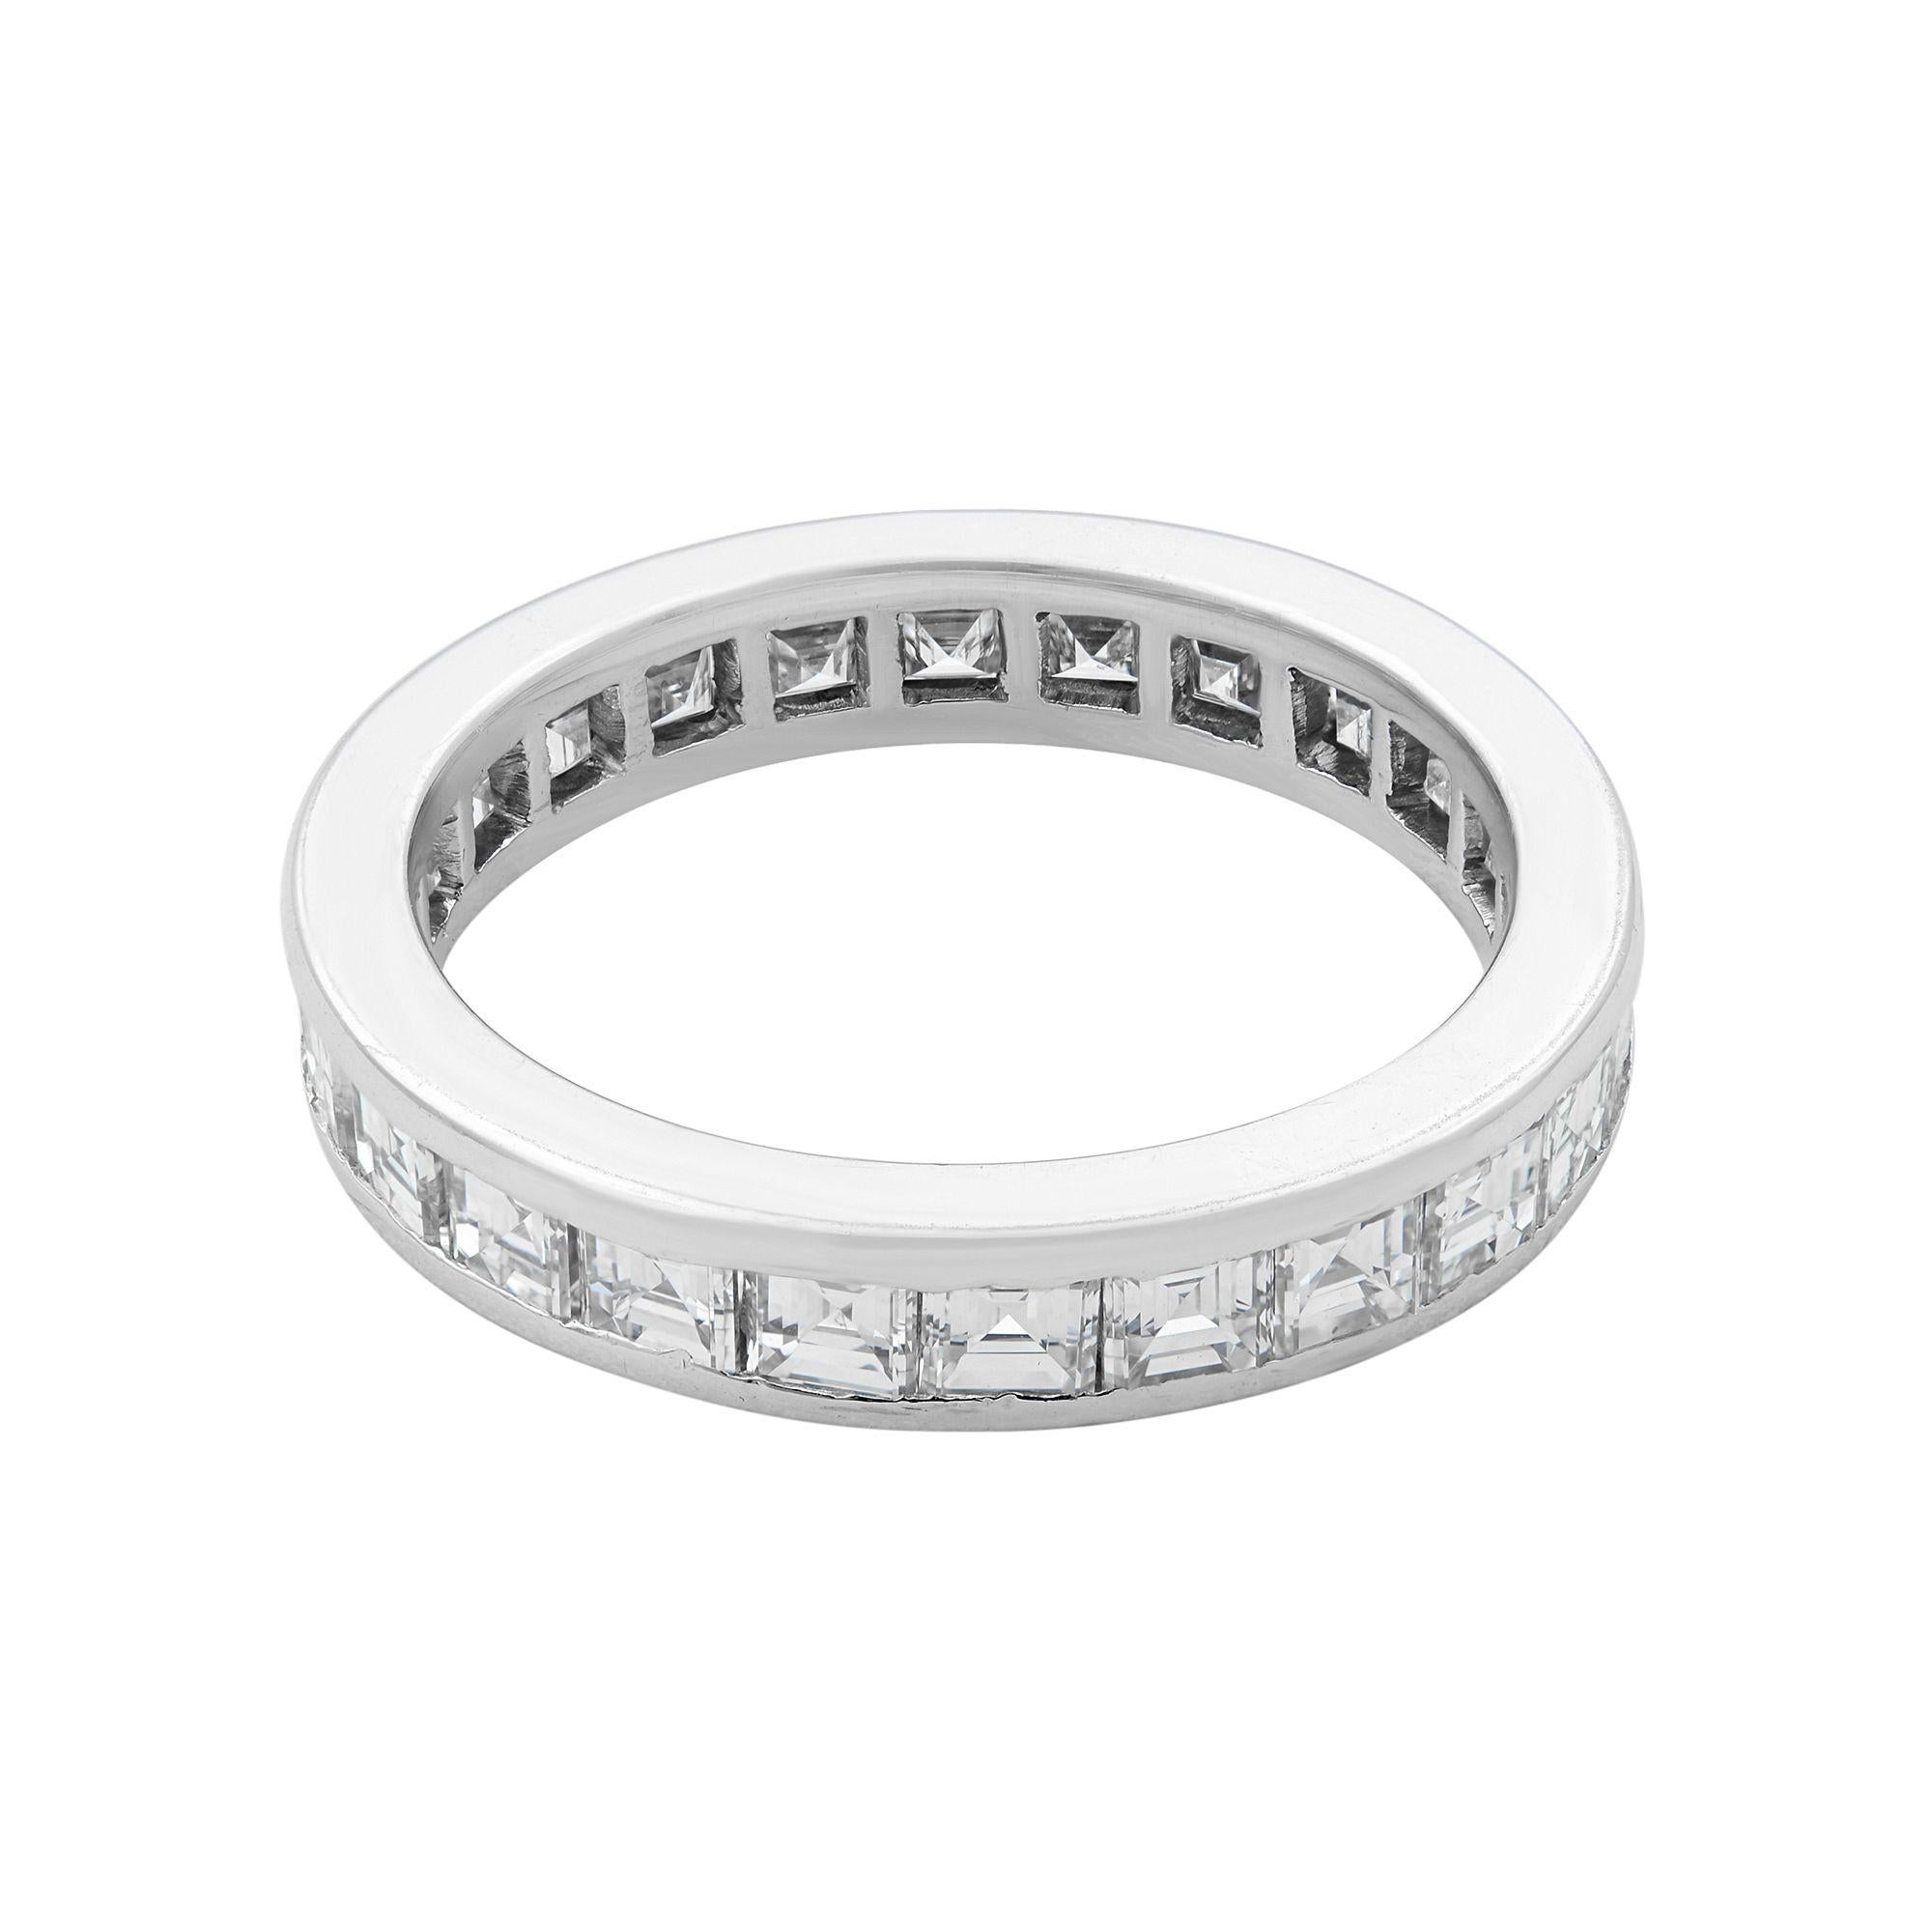 Square cut channel set diamond eternity wedding band crafted in 14K white gold. Ring size 6. Width of the ring is 3.60mm. Total diamonds 24 with carat weight is 1.25 cttw. Diamond color G and clarity VS2. Comes in a presentable gift box.